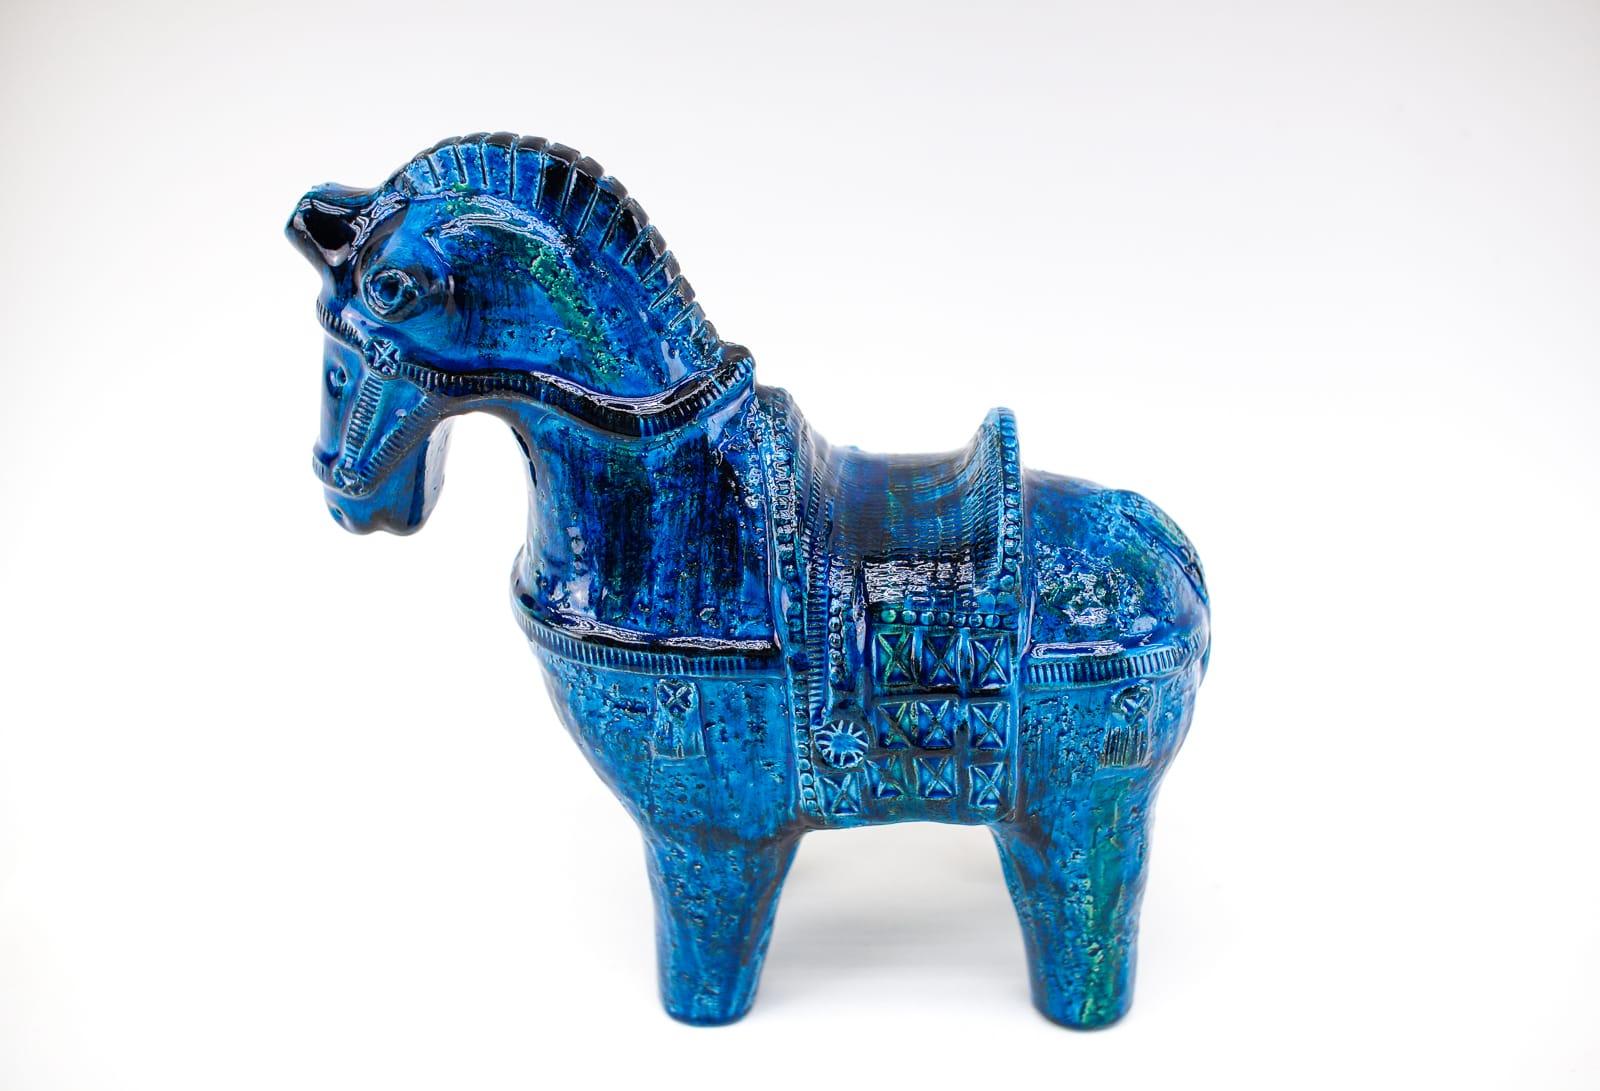 Large ceramic horse by Aldo Londi for Italian manufacturer Bitossi. The horse is in very good vintage condition. 

The color is very bright and extremely well preserved. Very clean.

Measures: height: 10.44 in. (26.5 cm)
Width: 10.63 in. (27